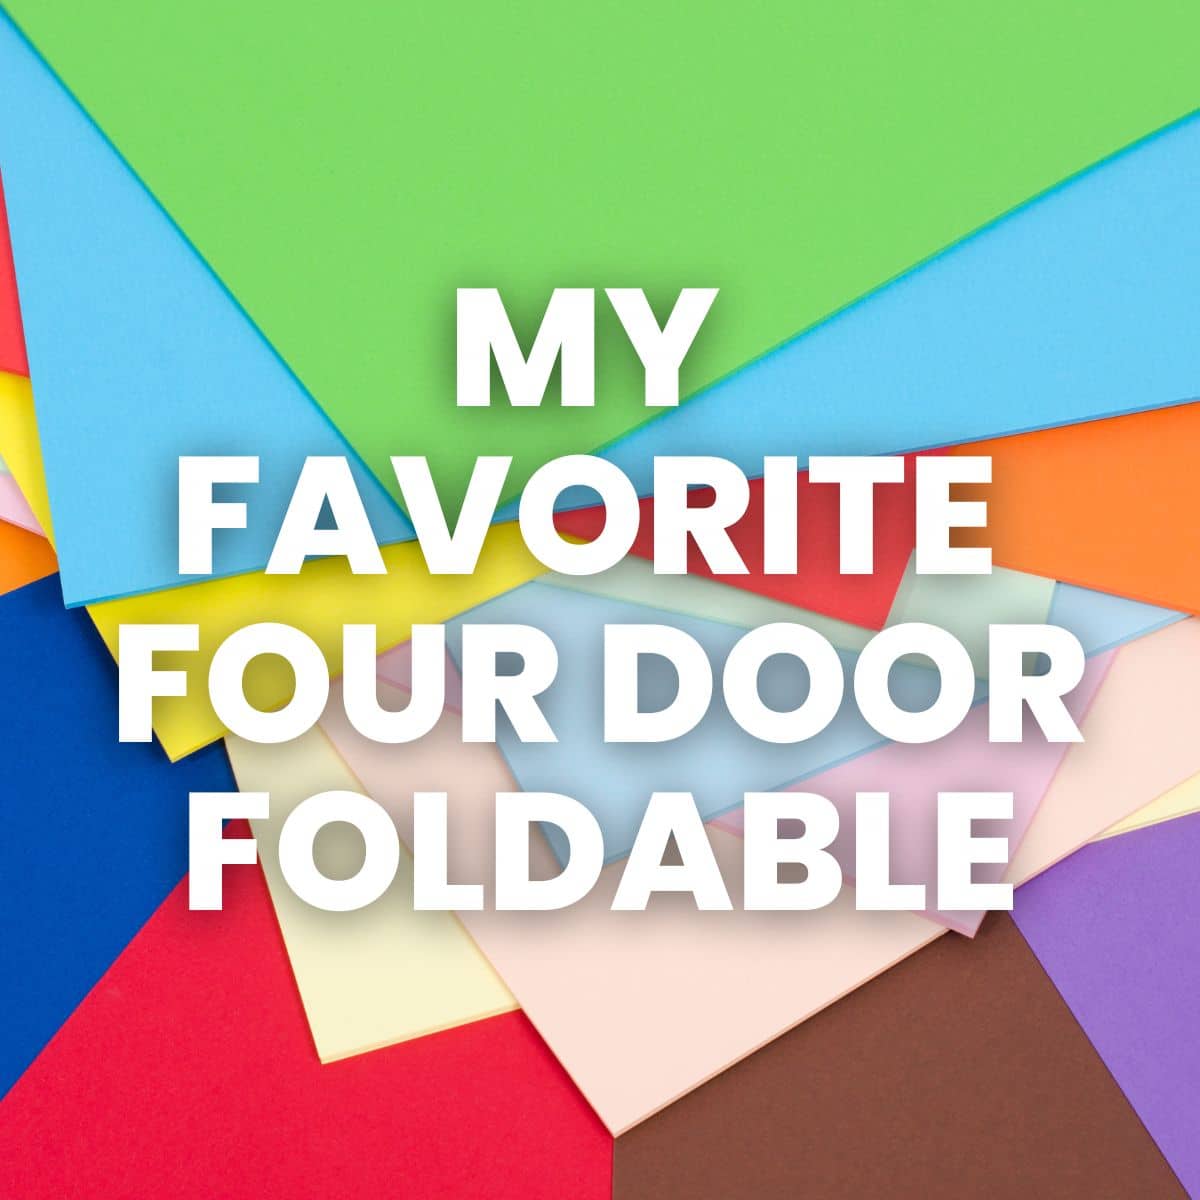 background of colorful paper with text "my favorite four door foldable" 